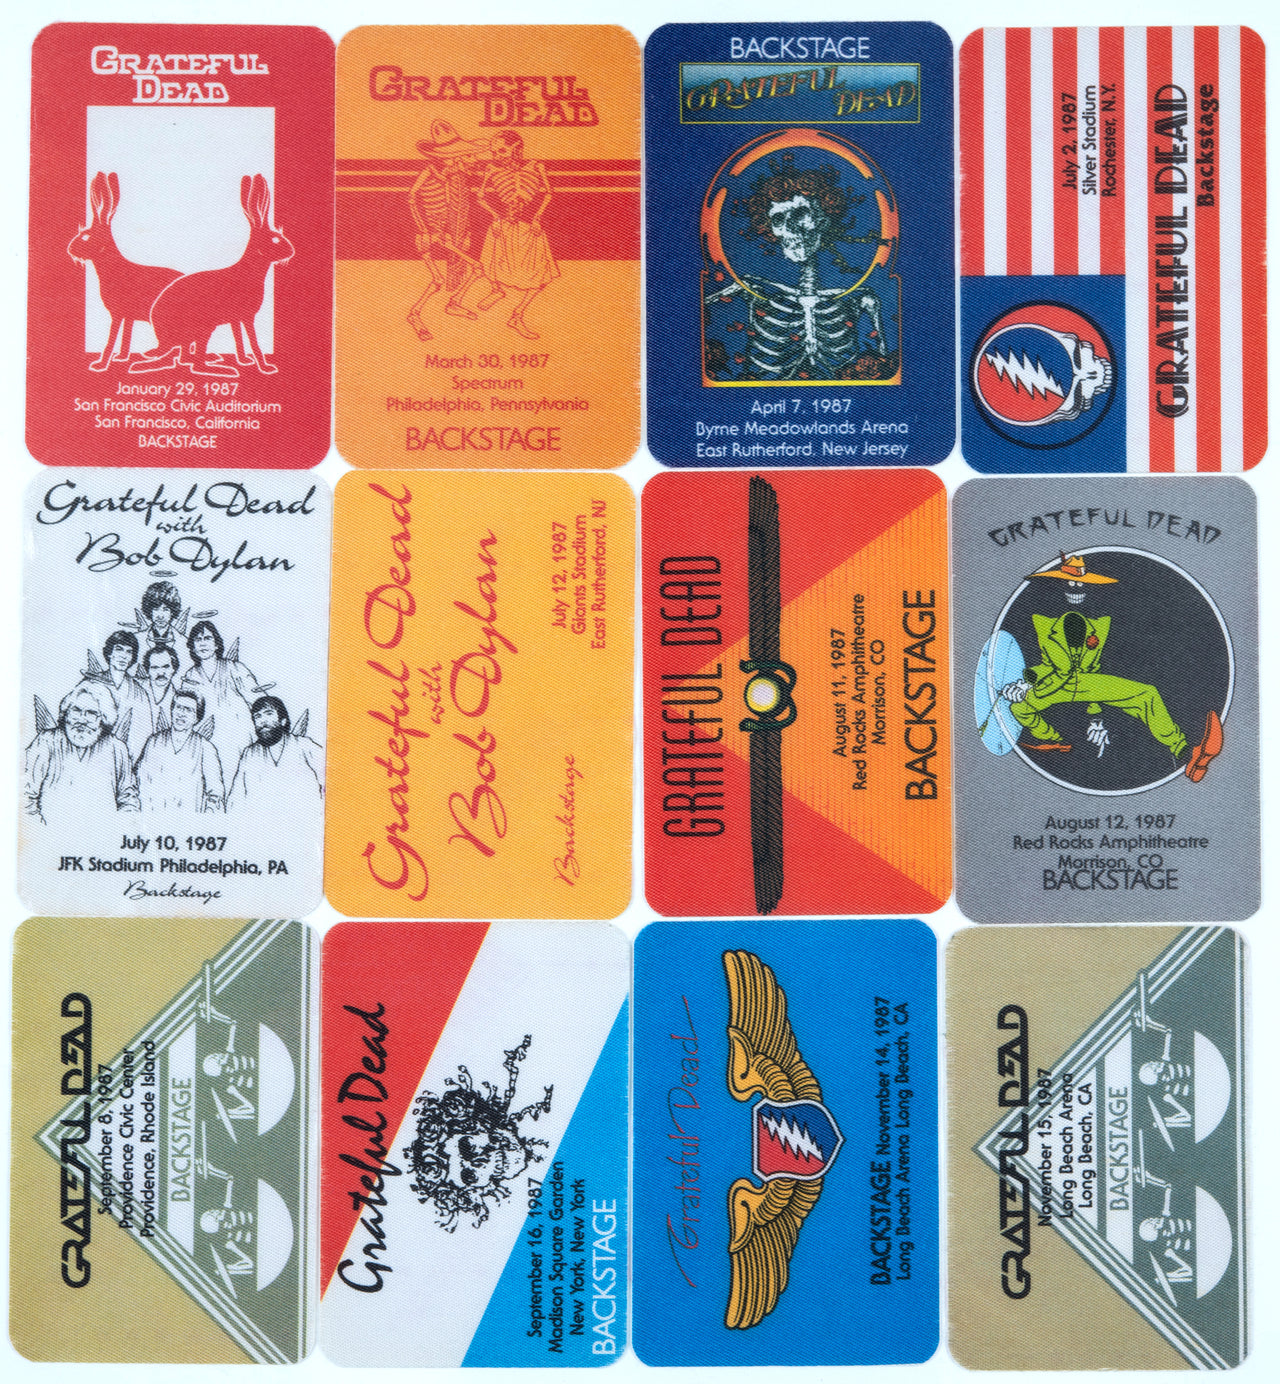 Grateful Dead Backstage Passes (1/29/1987 - 11/29/1987) from Dan Healy